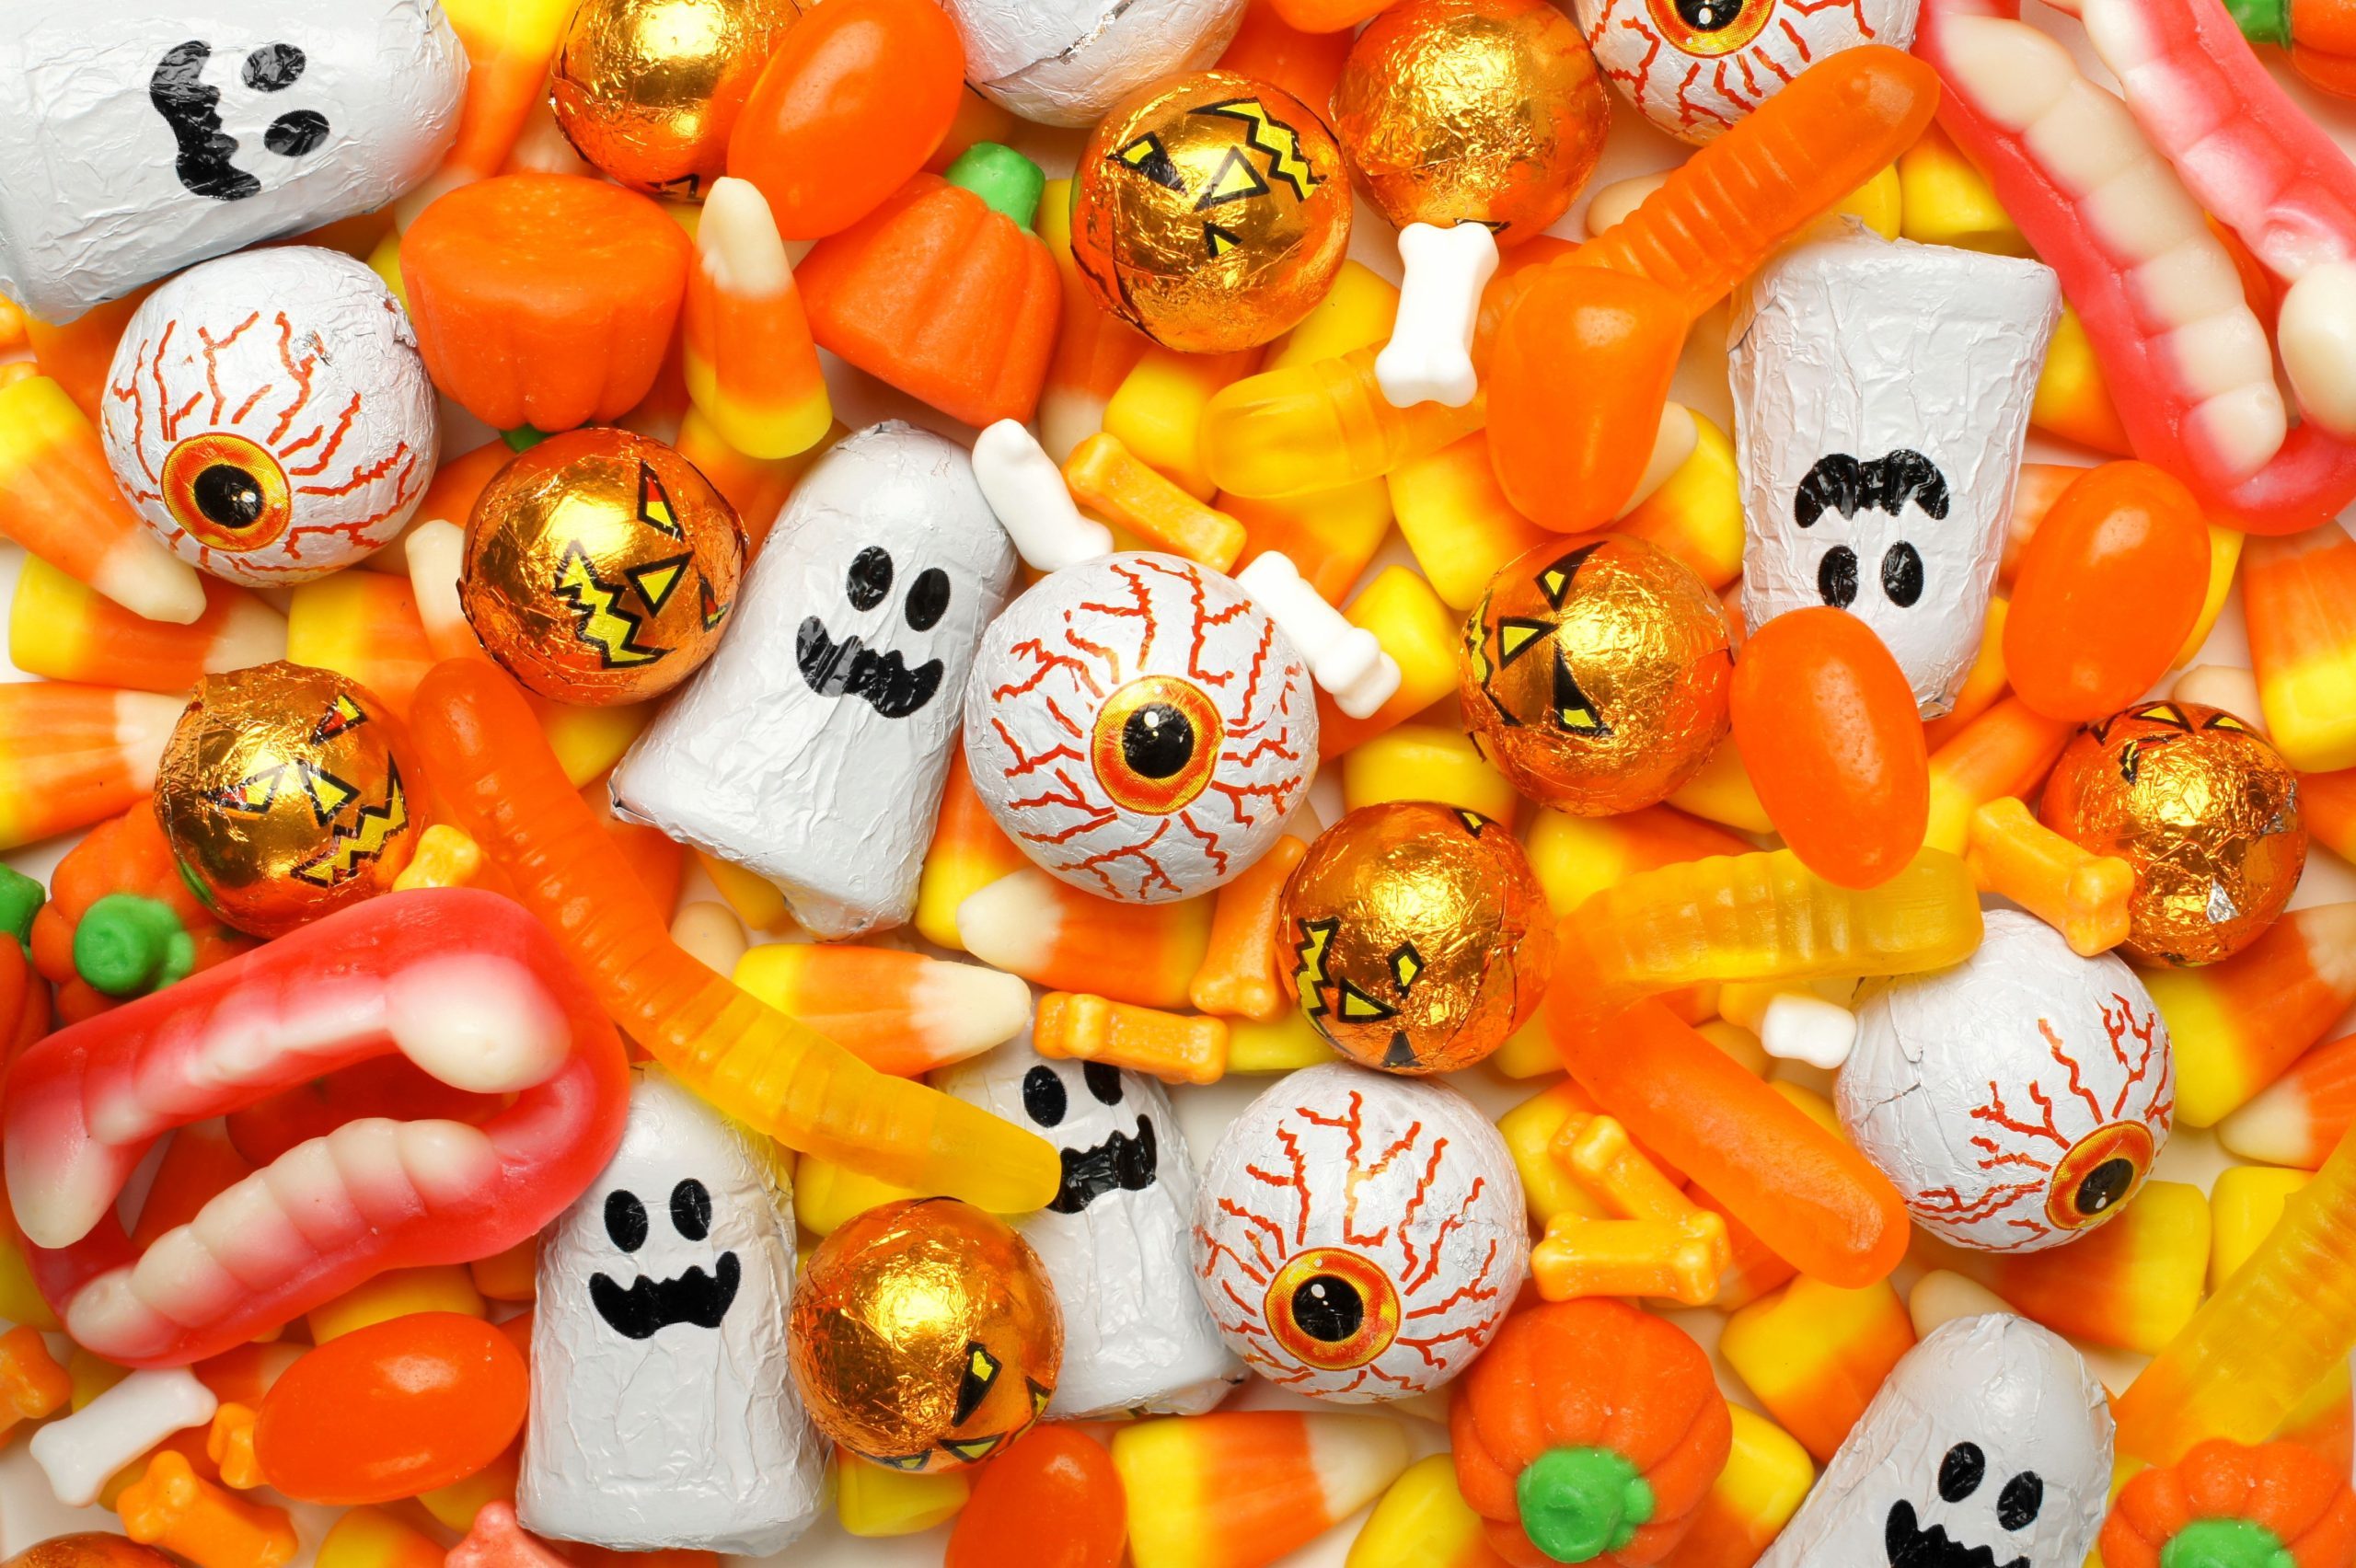 halloween-candy-background-royalty-free-image-1627919414-1988626